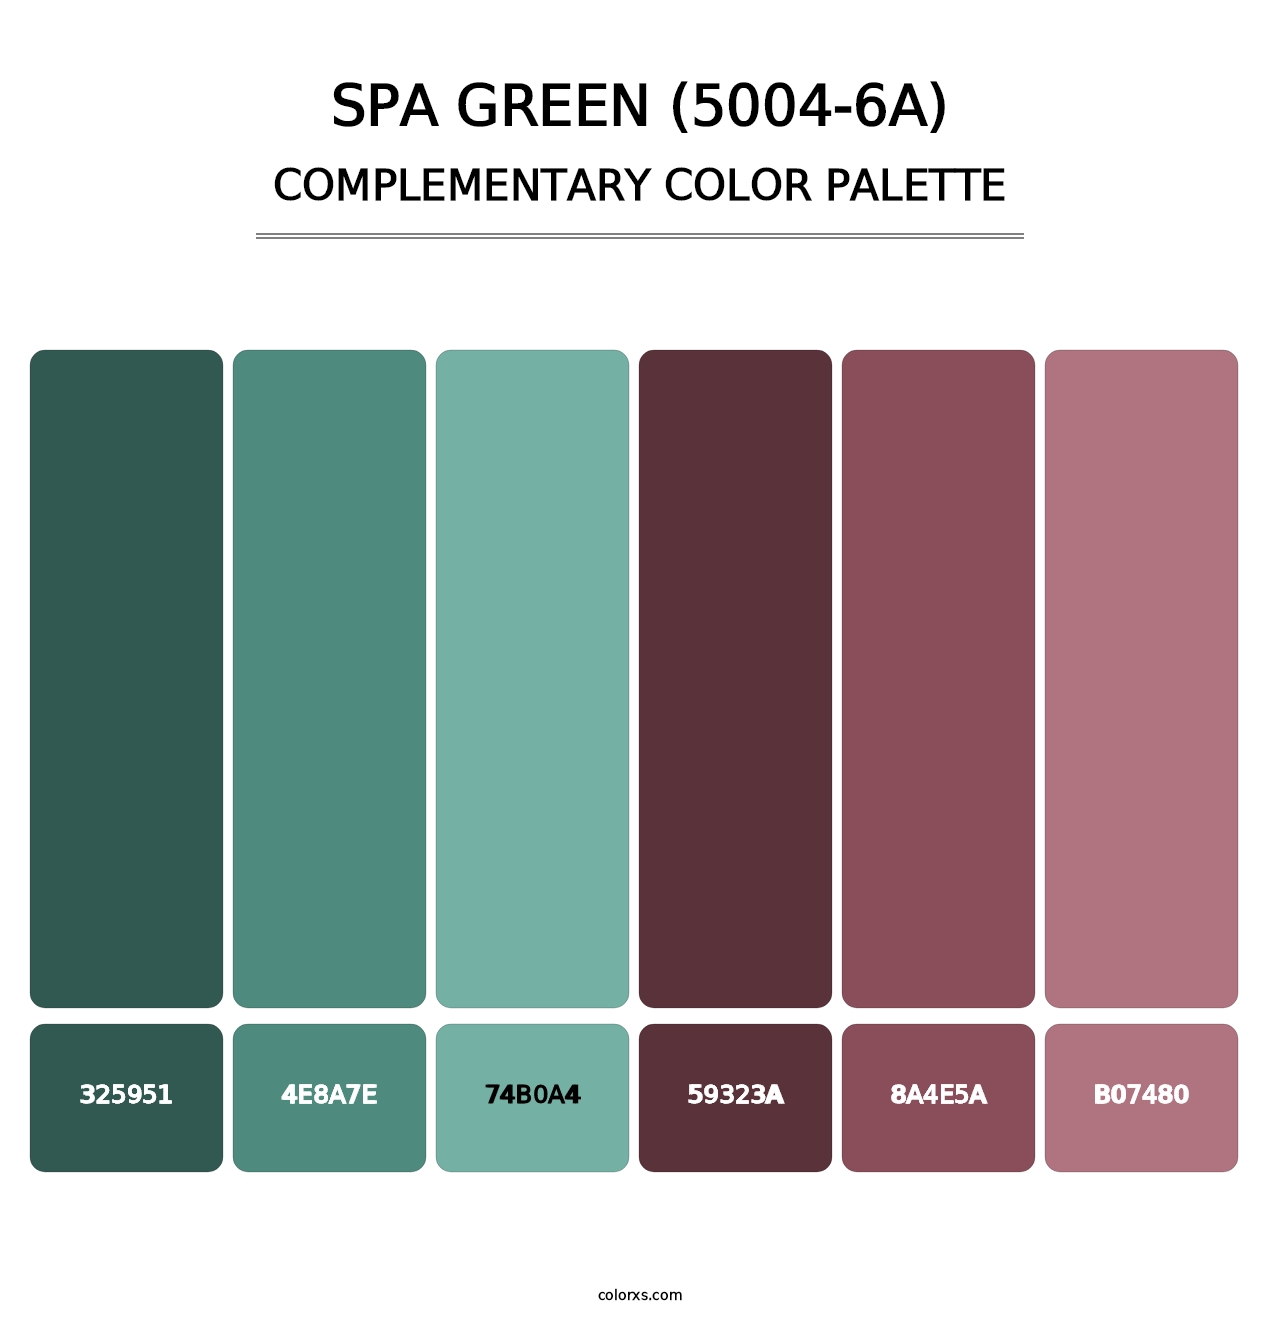 Spa Green (5004-6A) - Complementary Color Palette